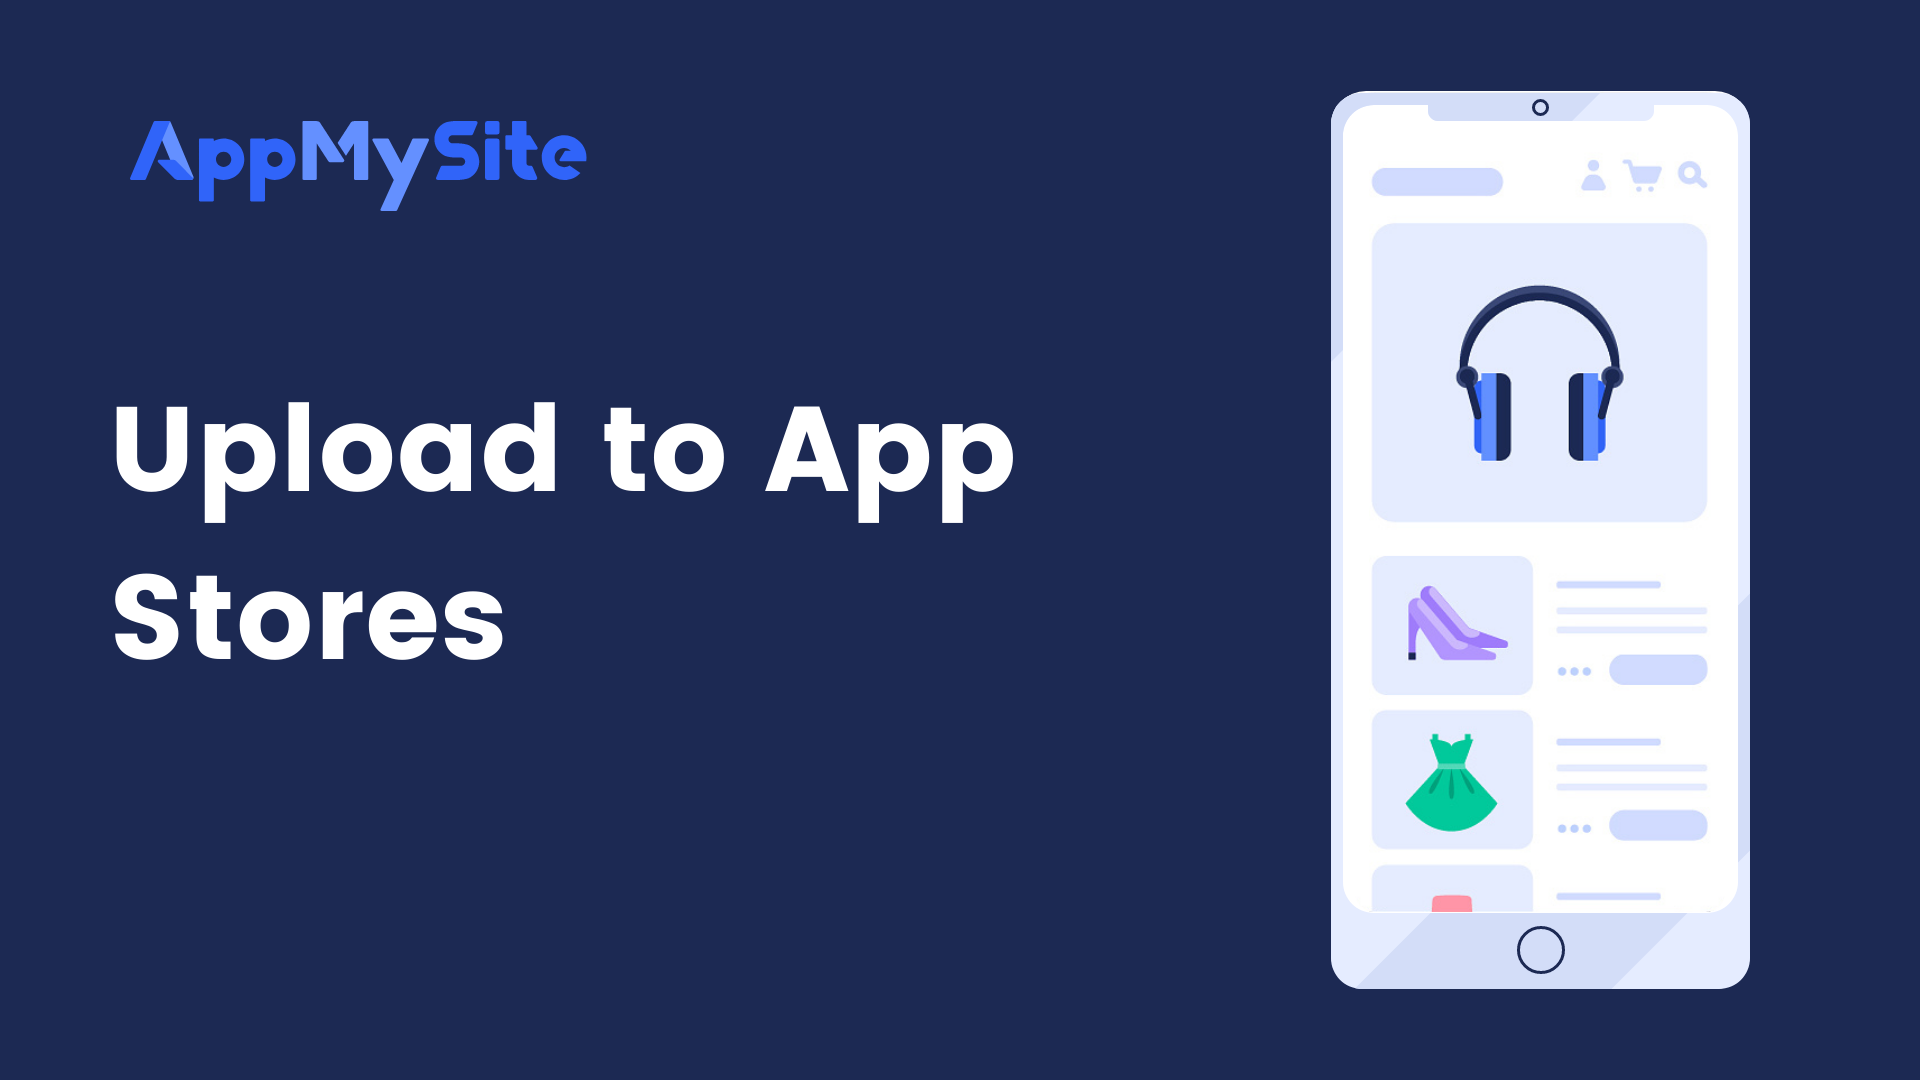 Upload to App Stores - AppMySite